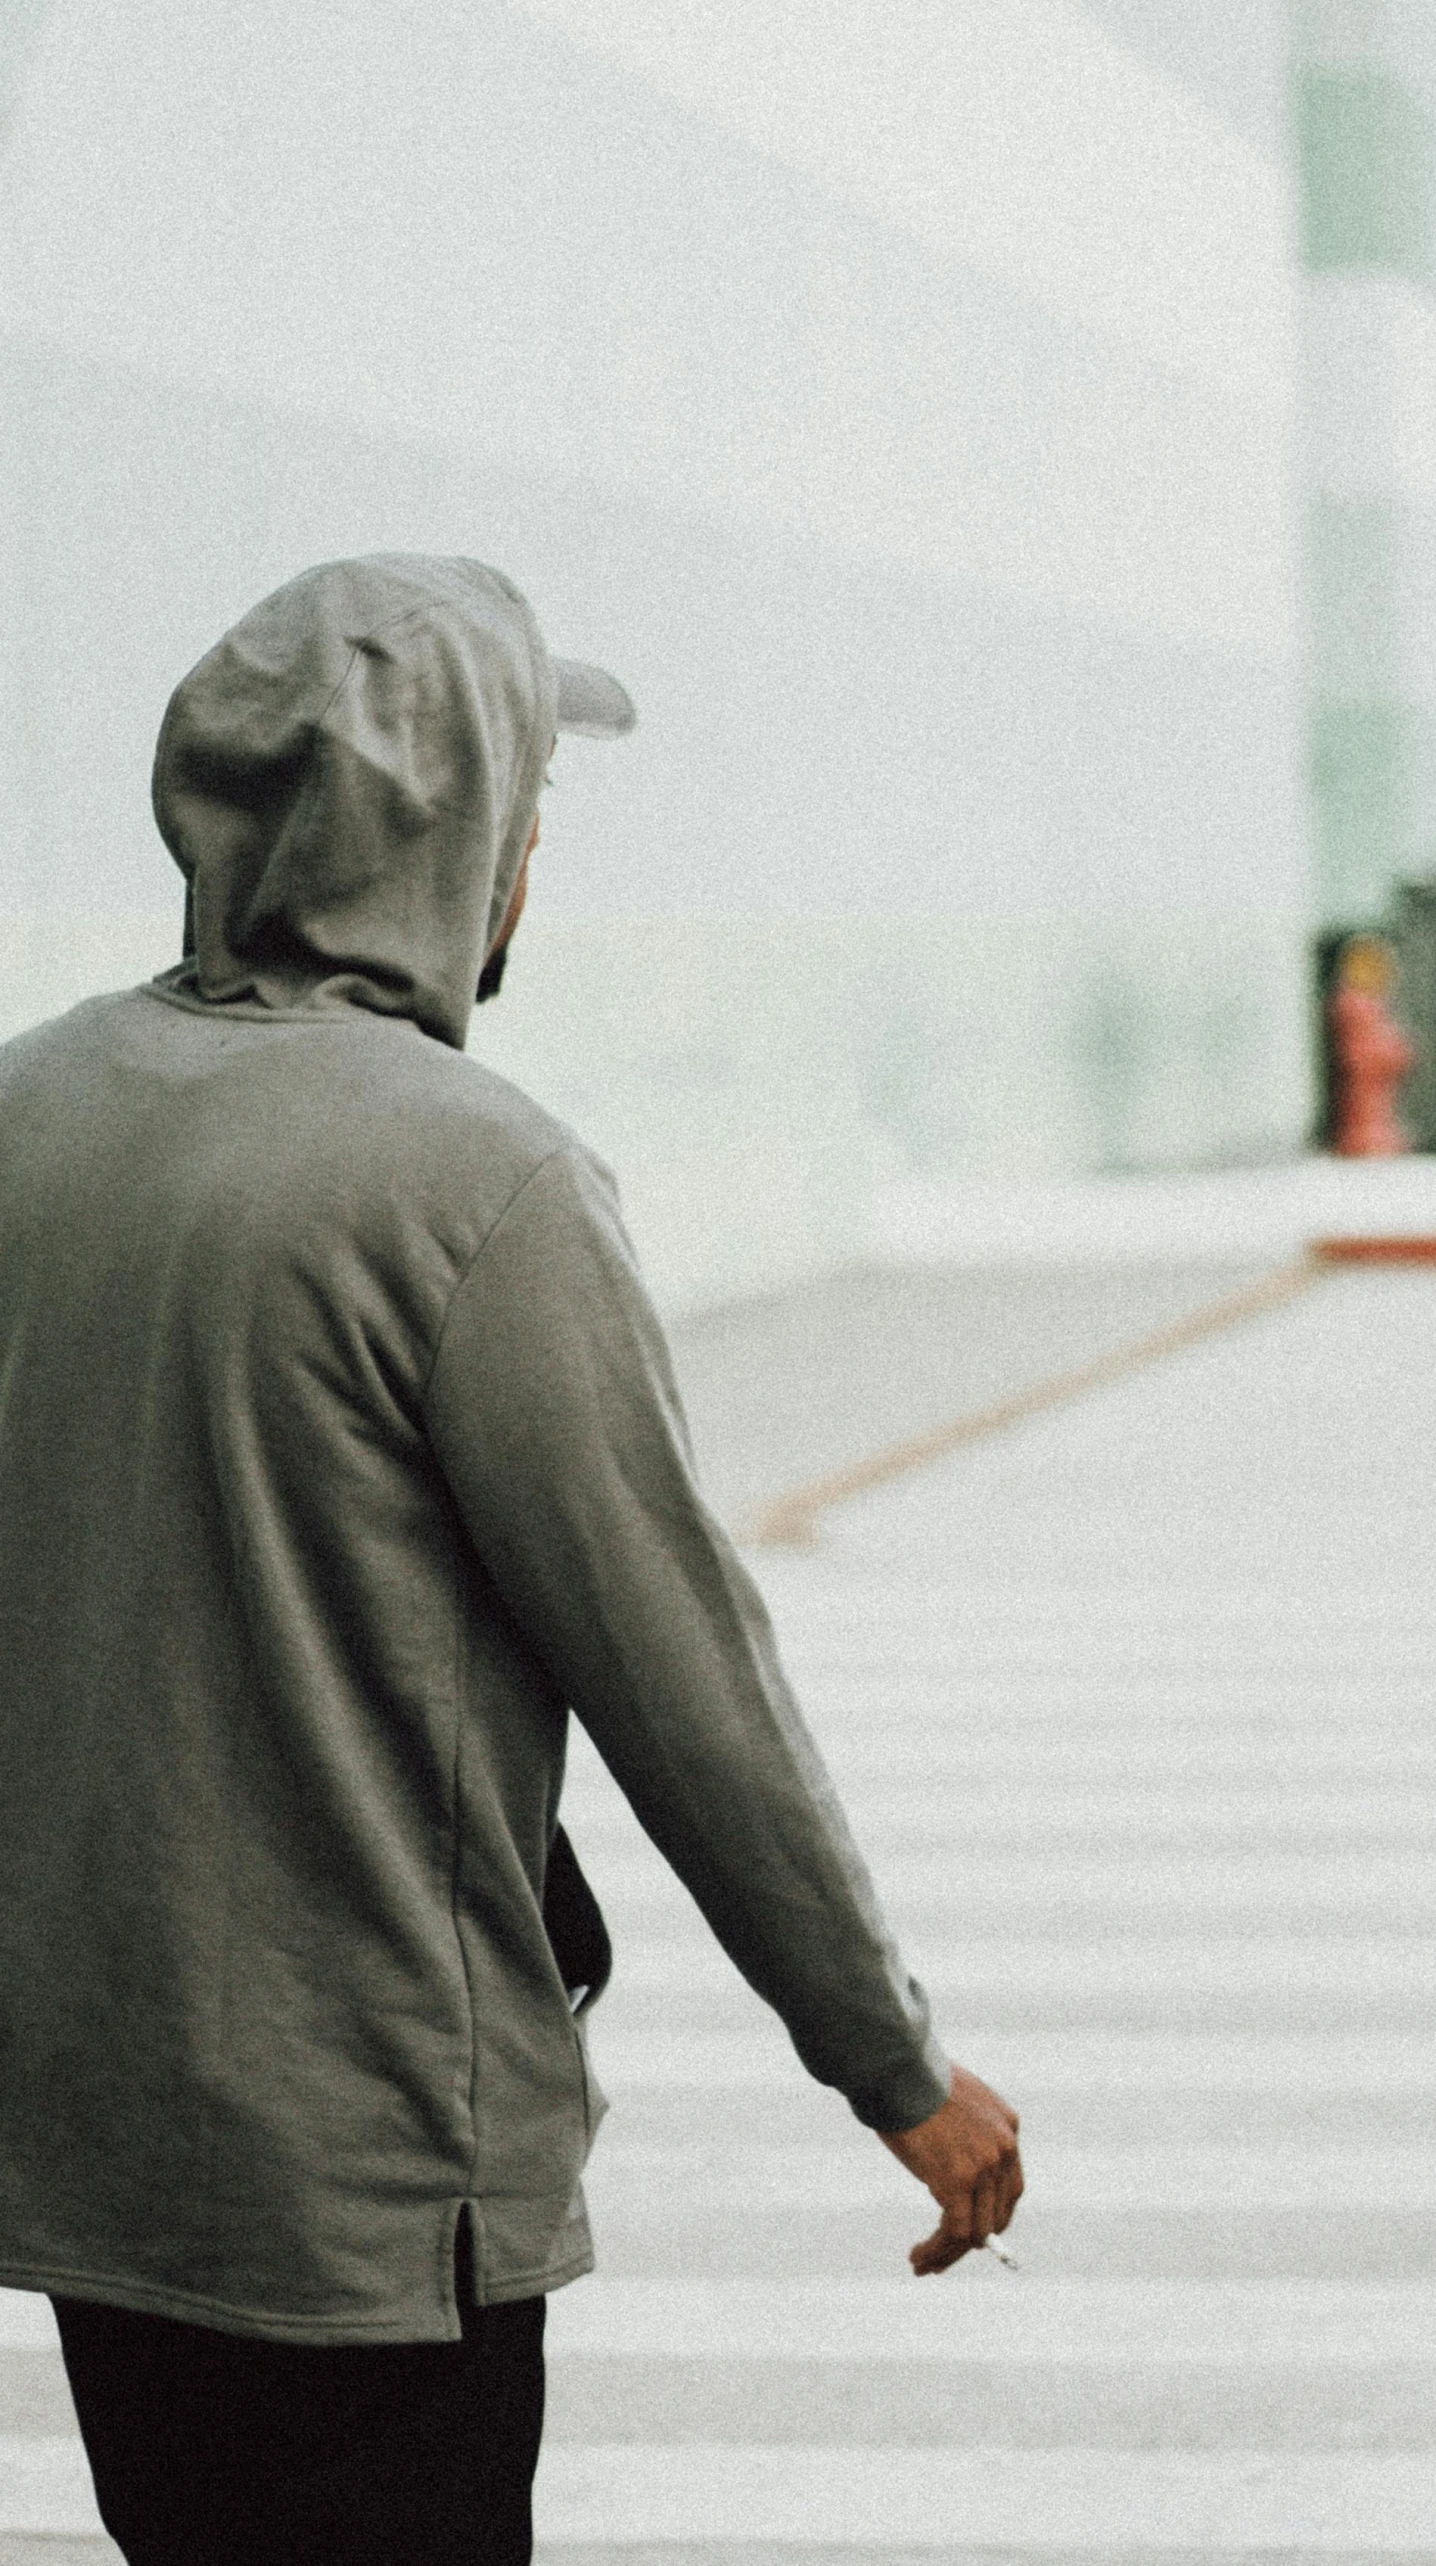 a man riding a skateboard across a cross walk, a picture, unsplash, realism, gray hoodie, facing away, low quality photo, background image